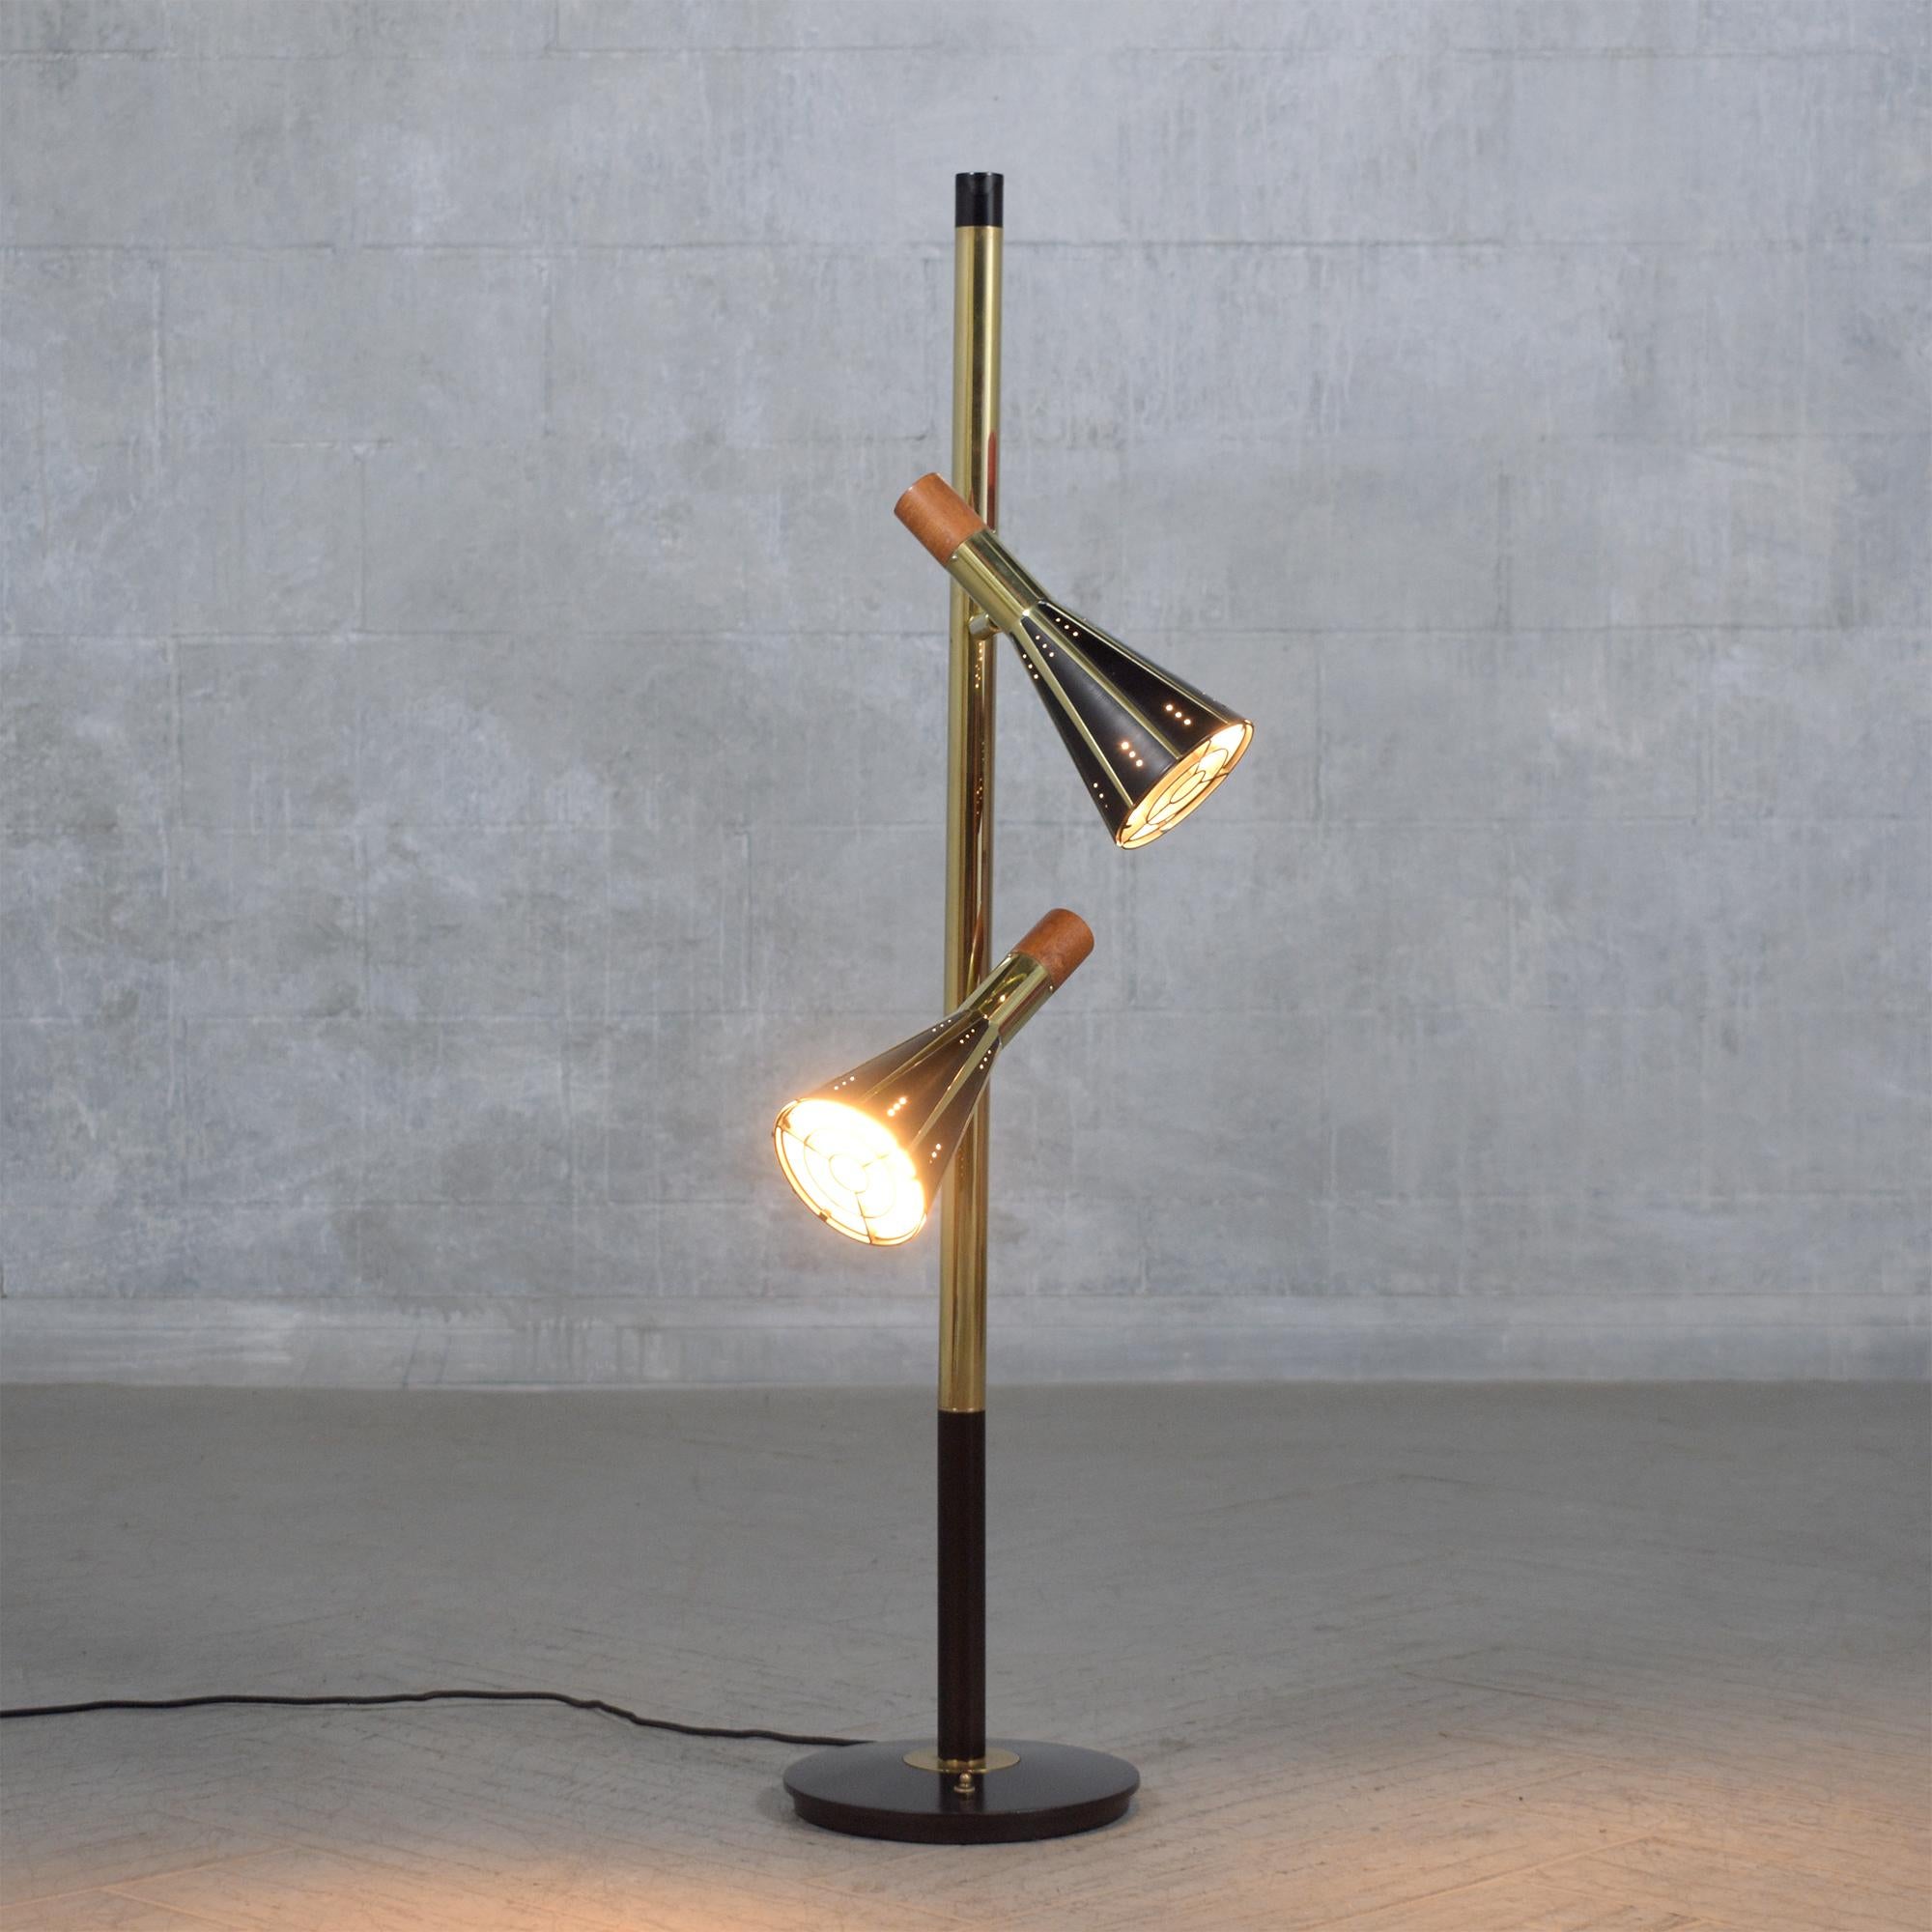 Experience the timeless elegance of our modern vintage 1960 floor lamp, skillfully restored to its original splendor. Composed of brass, wood, and metal, this exquisite lamp has been carefully rejuvenated by our expert in-house craftsmen. Now fully